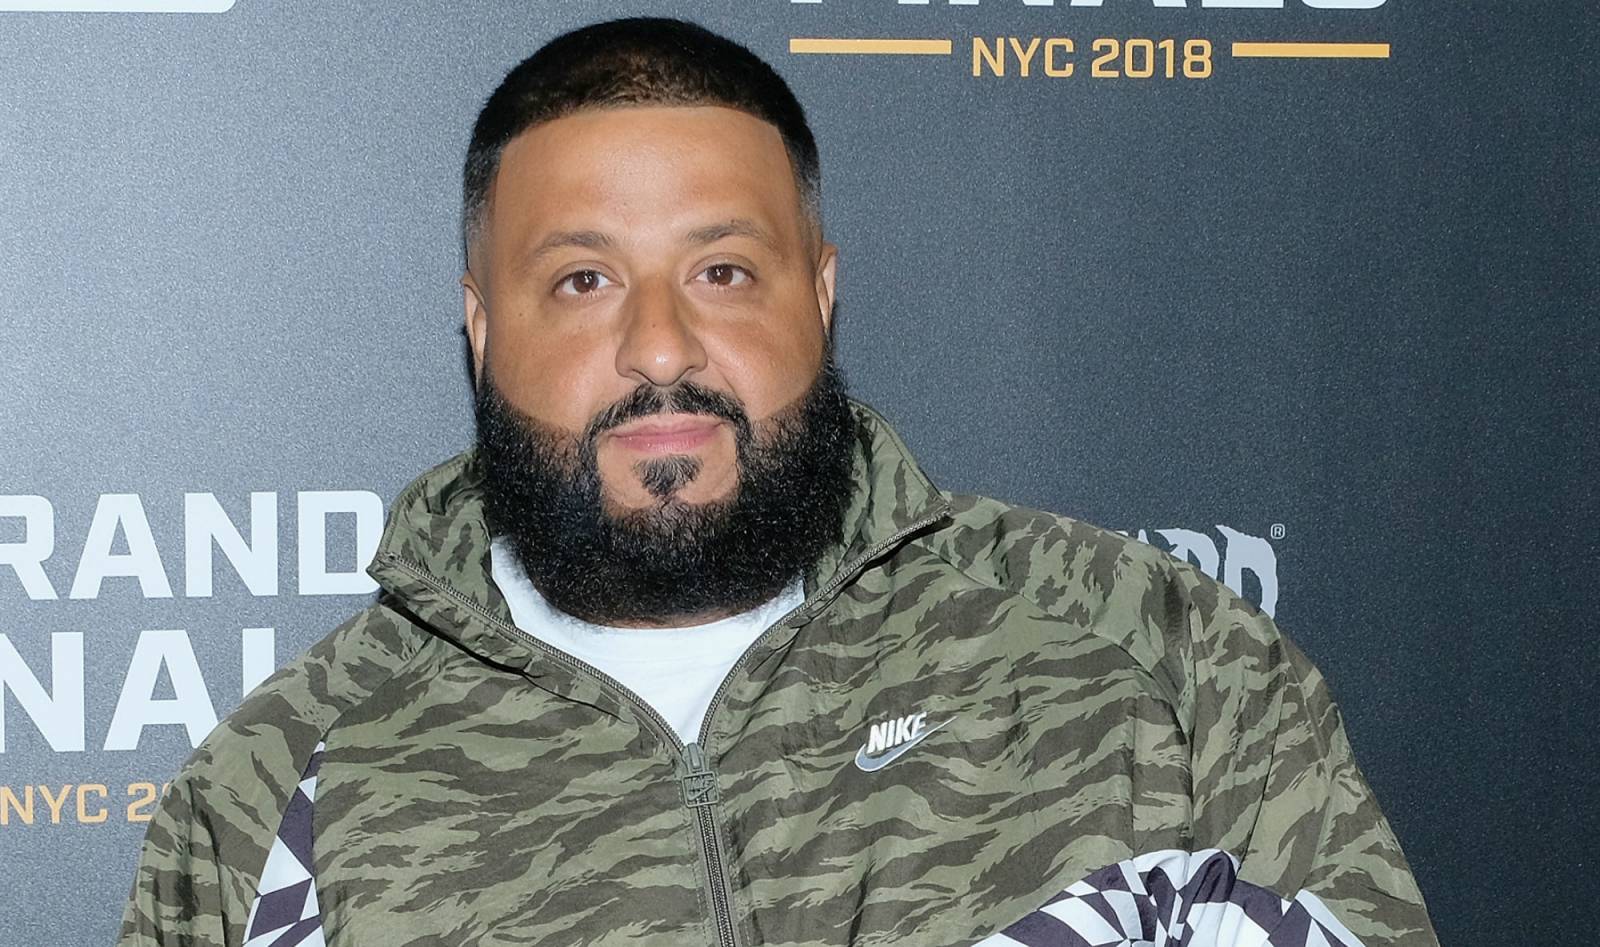 DJ Khaled has become Apple Music's first artist-in-residence